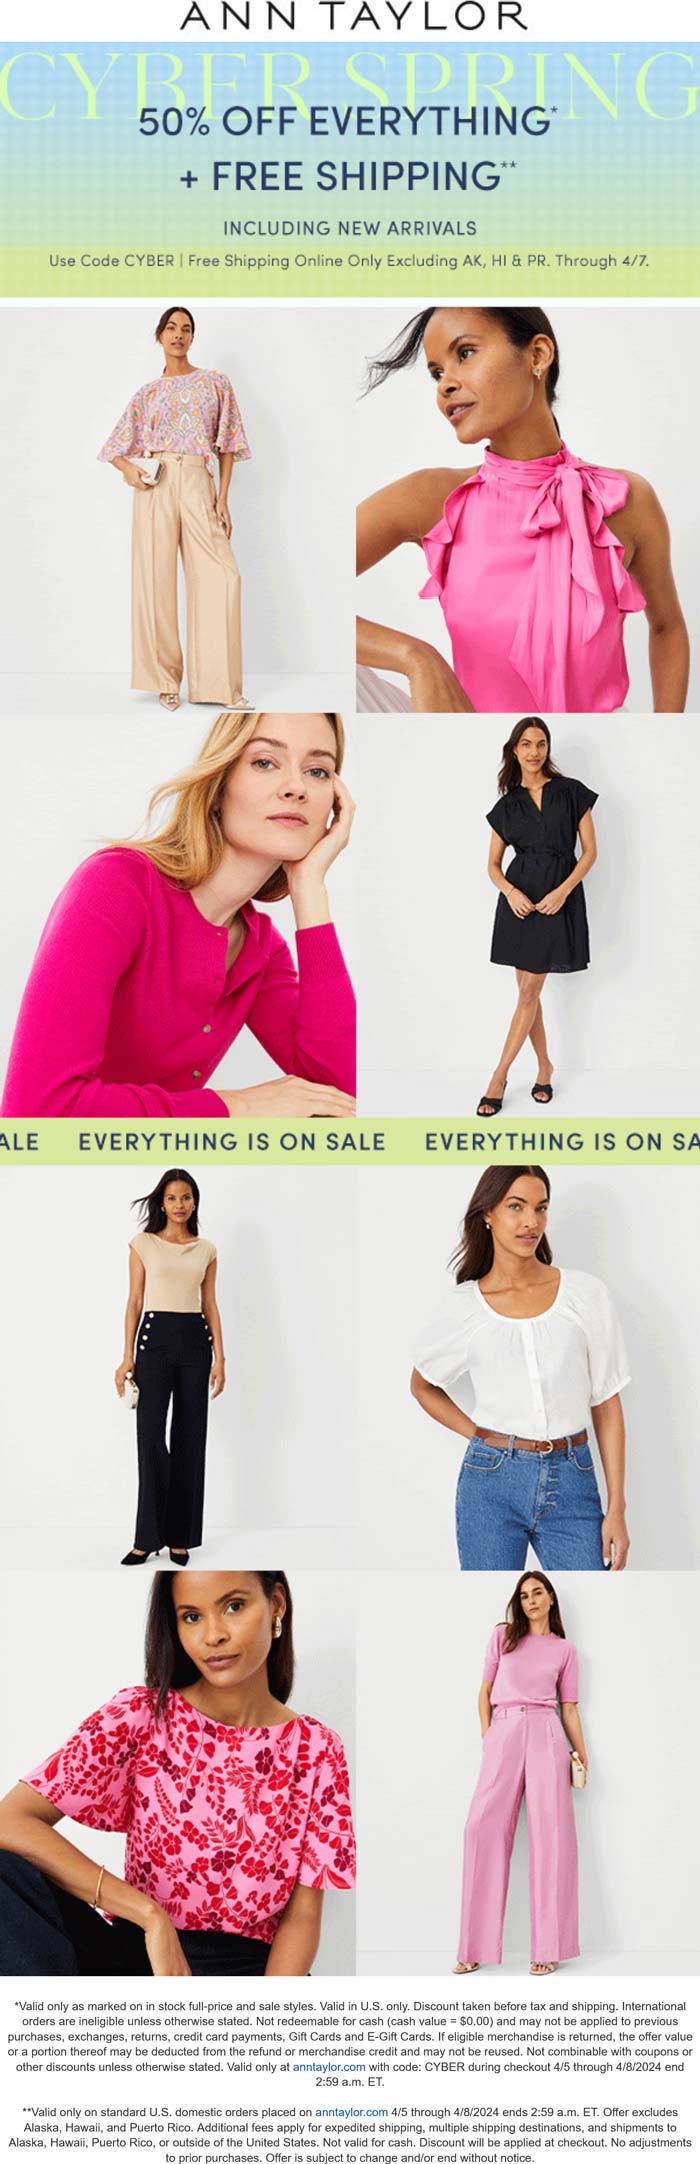 Ann Taylor stores Coupon  50% off everything online at Ann Taylor via promo code CYBER #anntaylor 